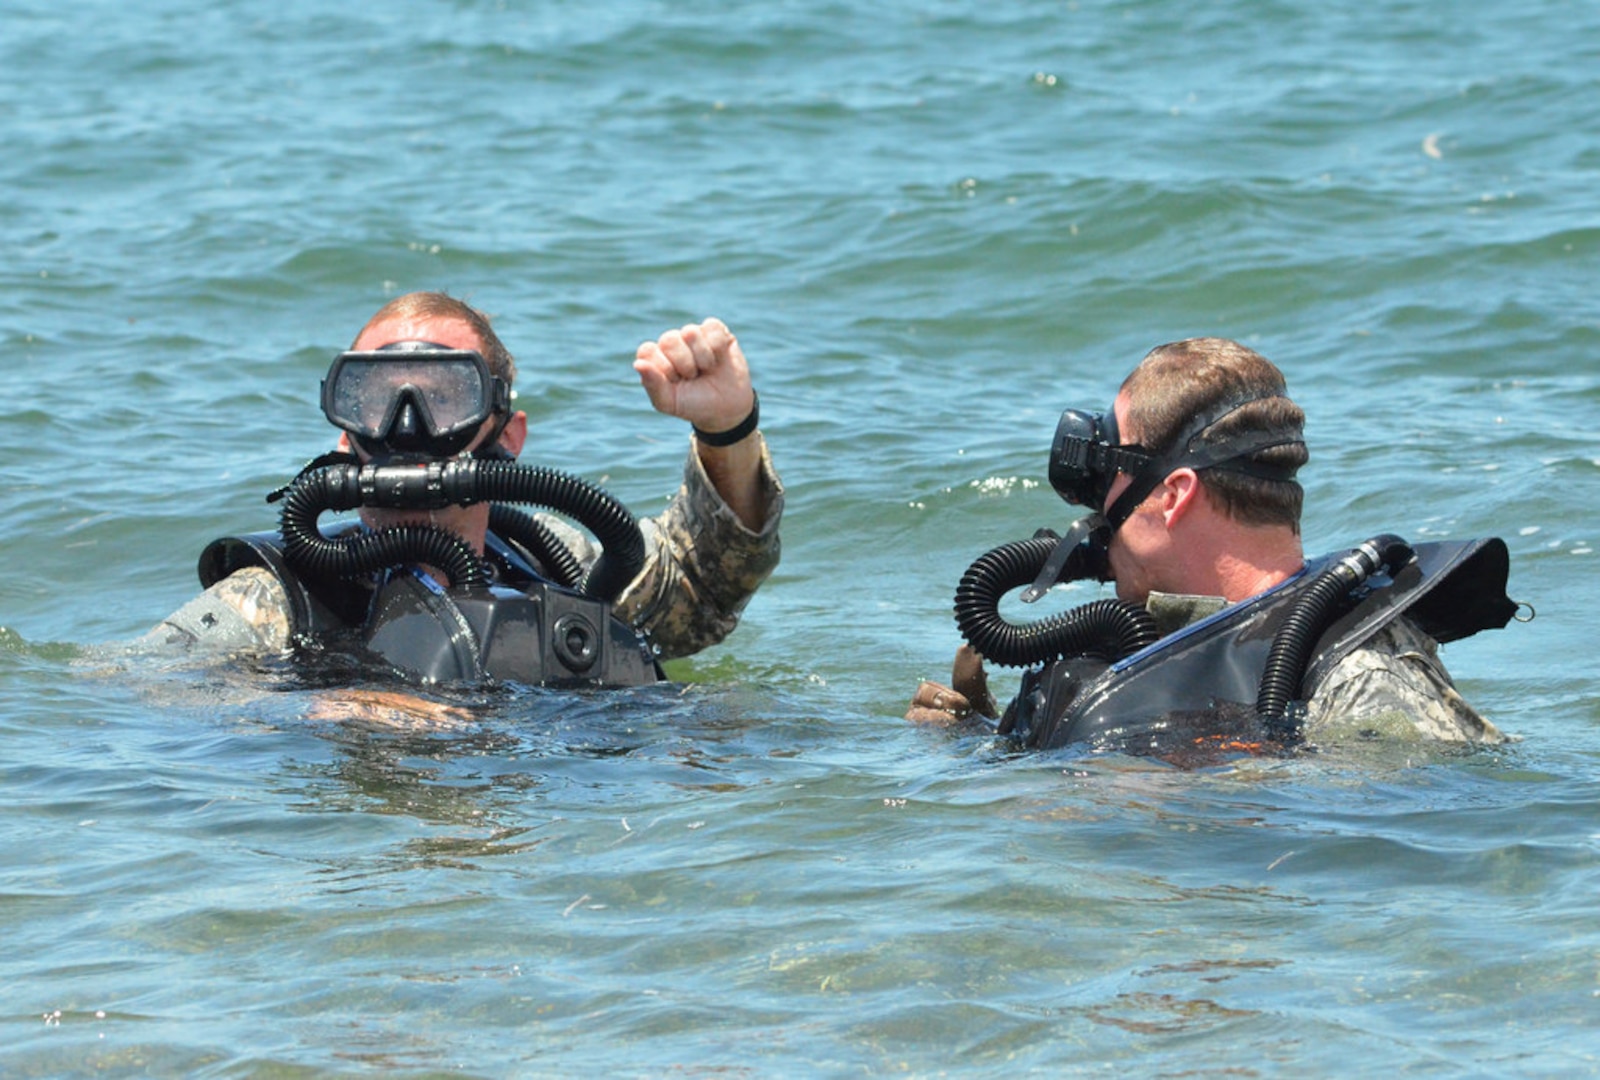 Florida Army National Guard Soldiers from 3rd Battalion, 20th Special Forces Group, surface after a 500-meter underwater swim at the U.S. Army Special Forces Underwater Operations School in Key West, Fla., June 24, 2014. 